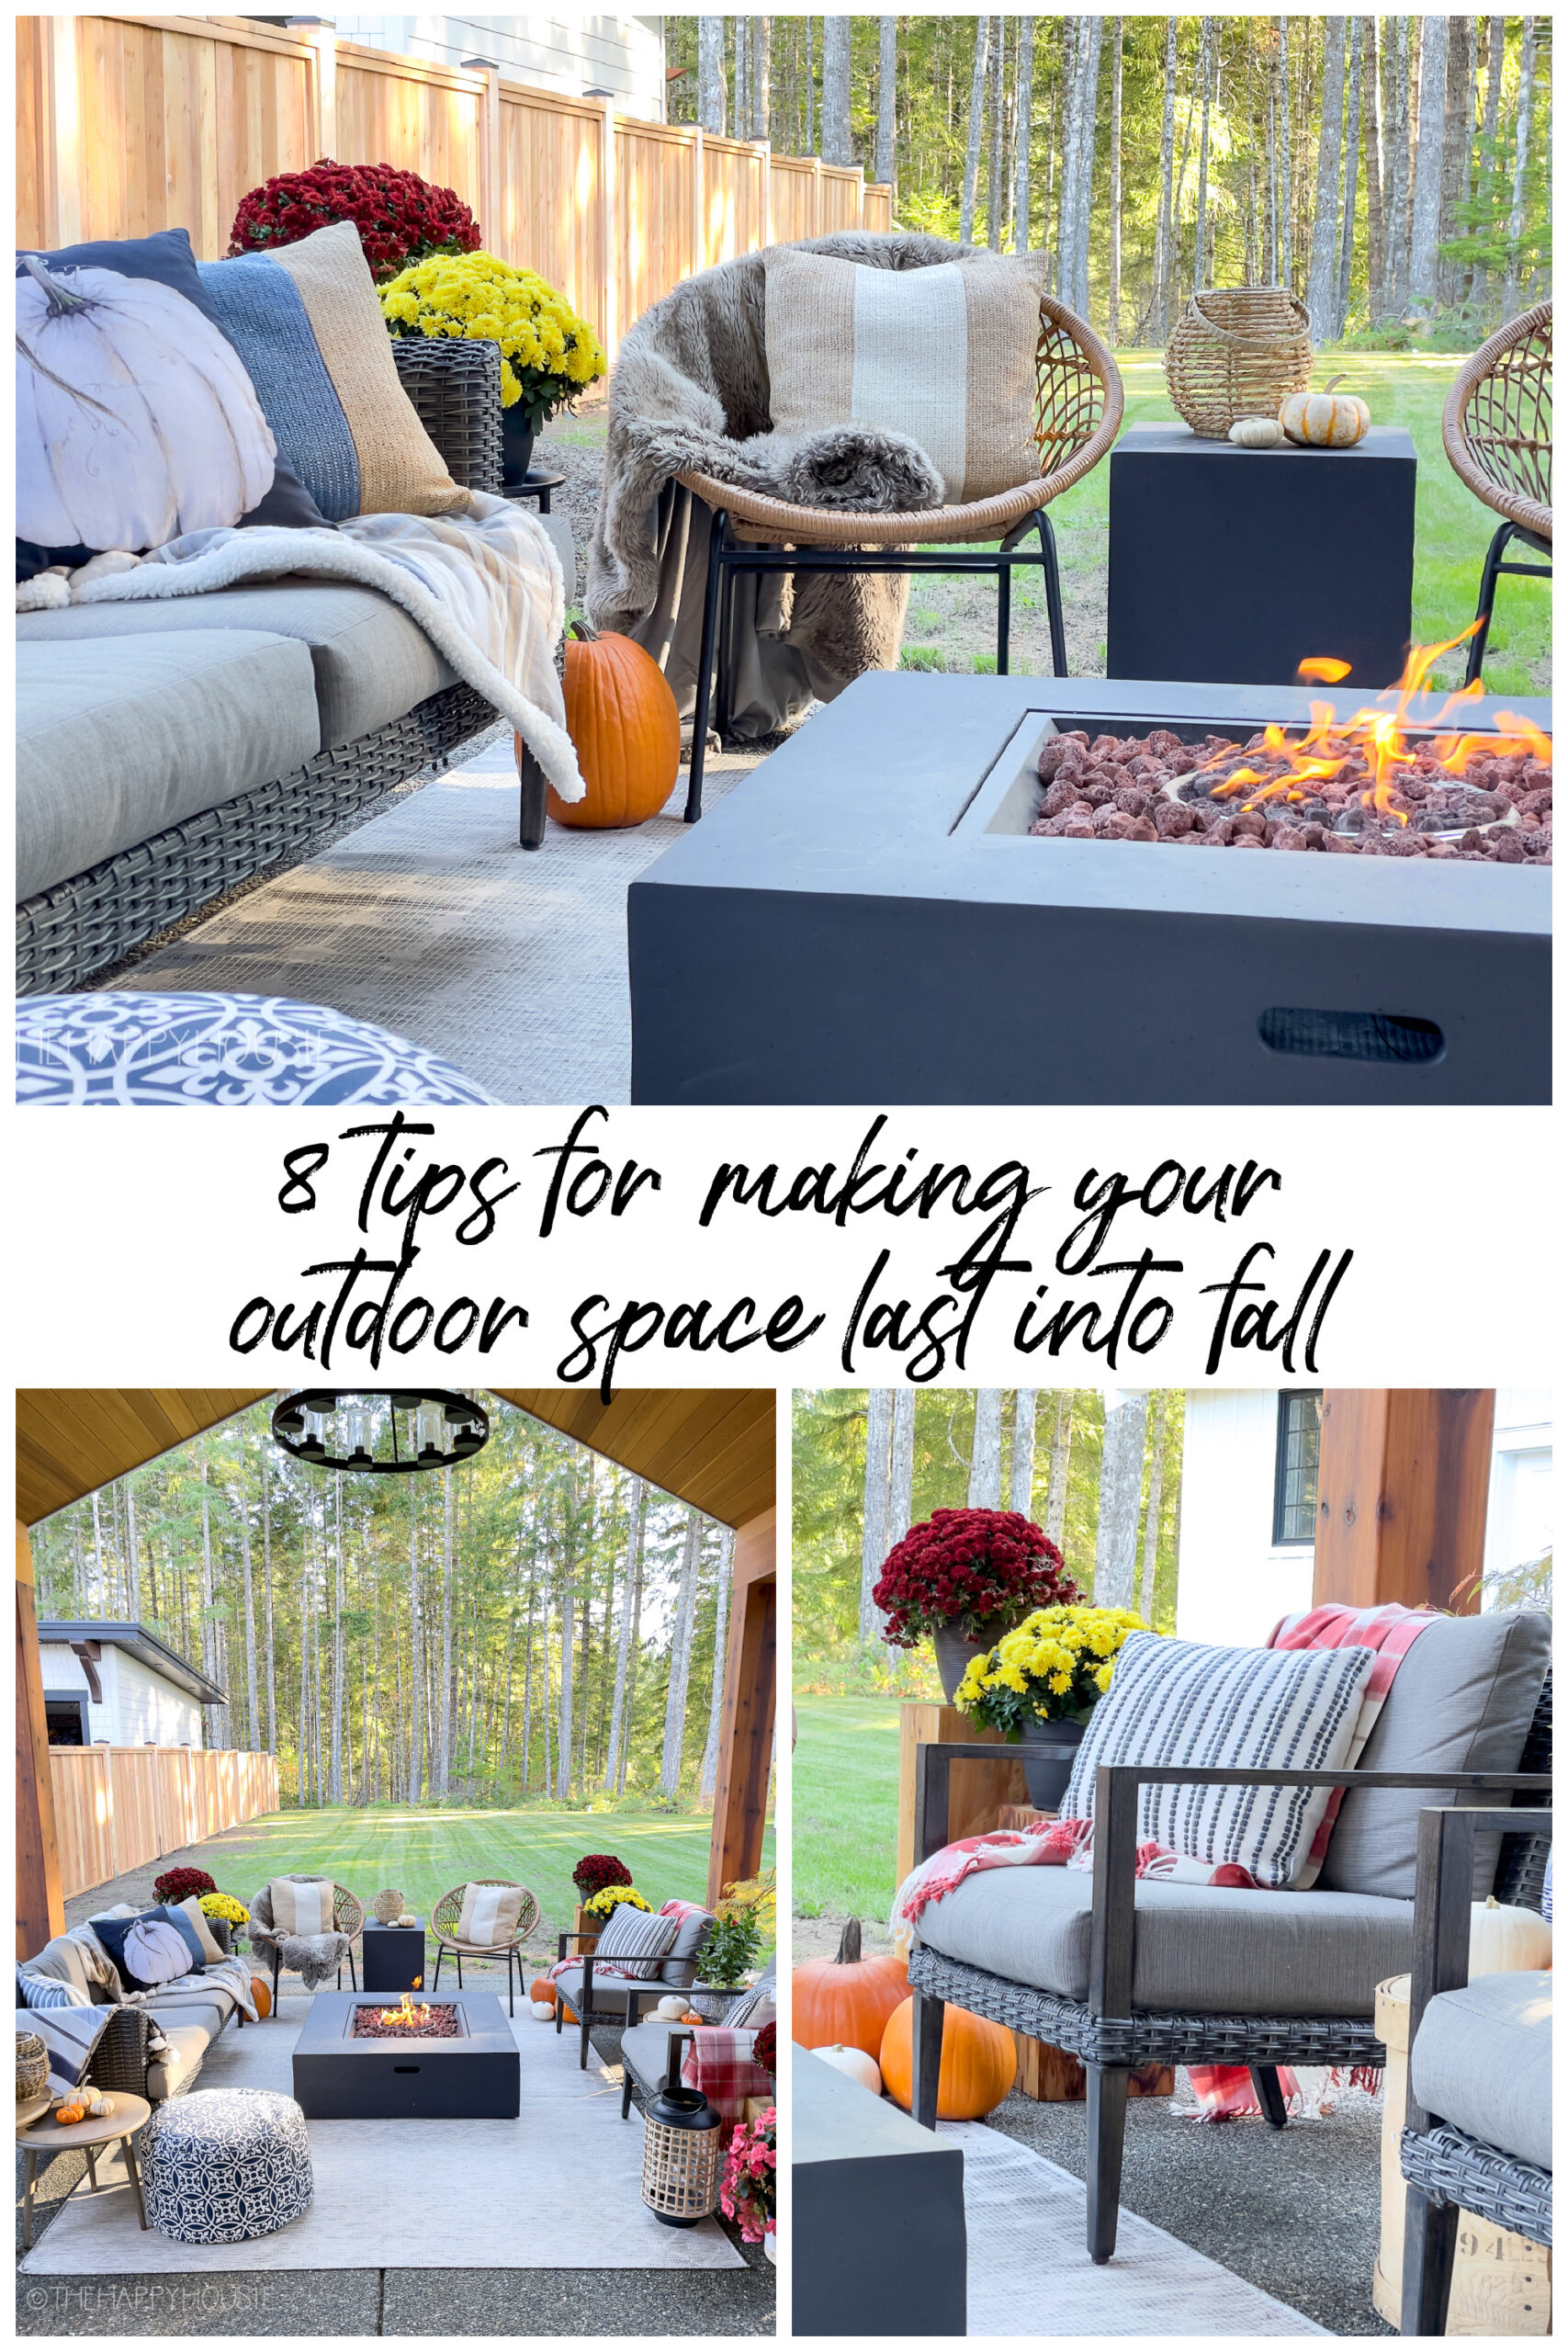 8 Tips For Making Your Outdoor Space Last Into Fall poster.